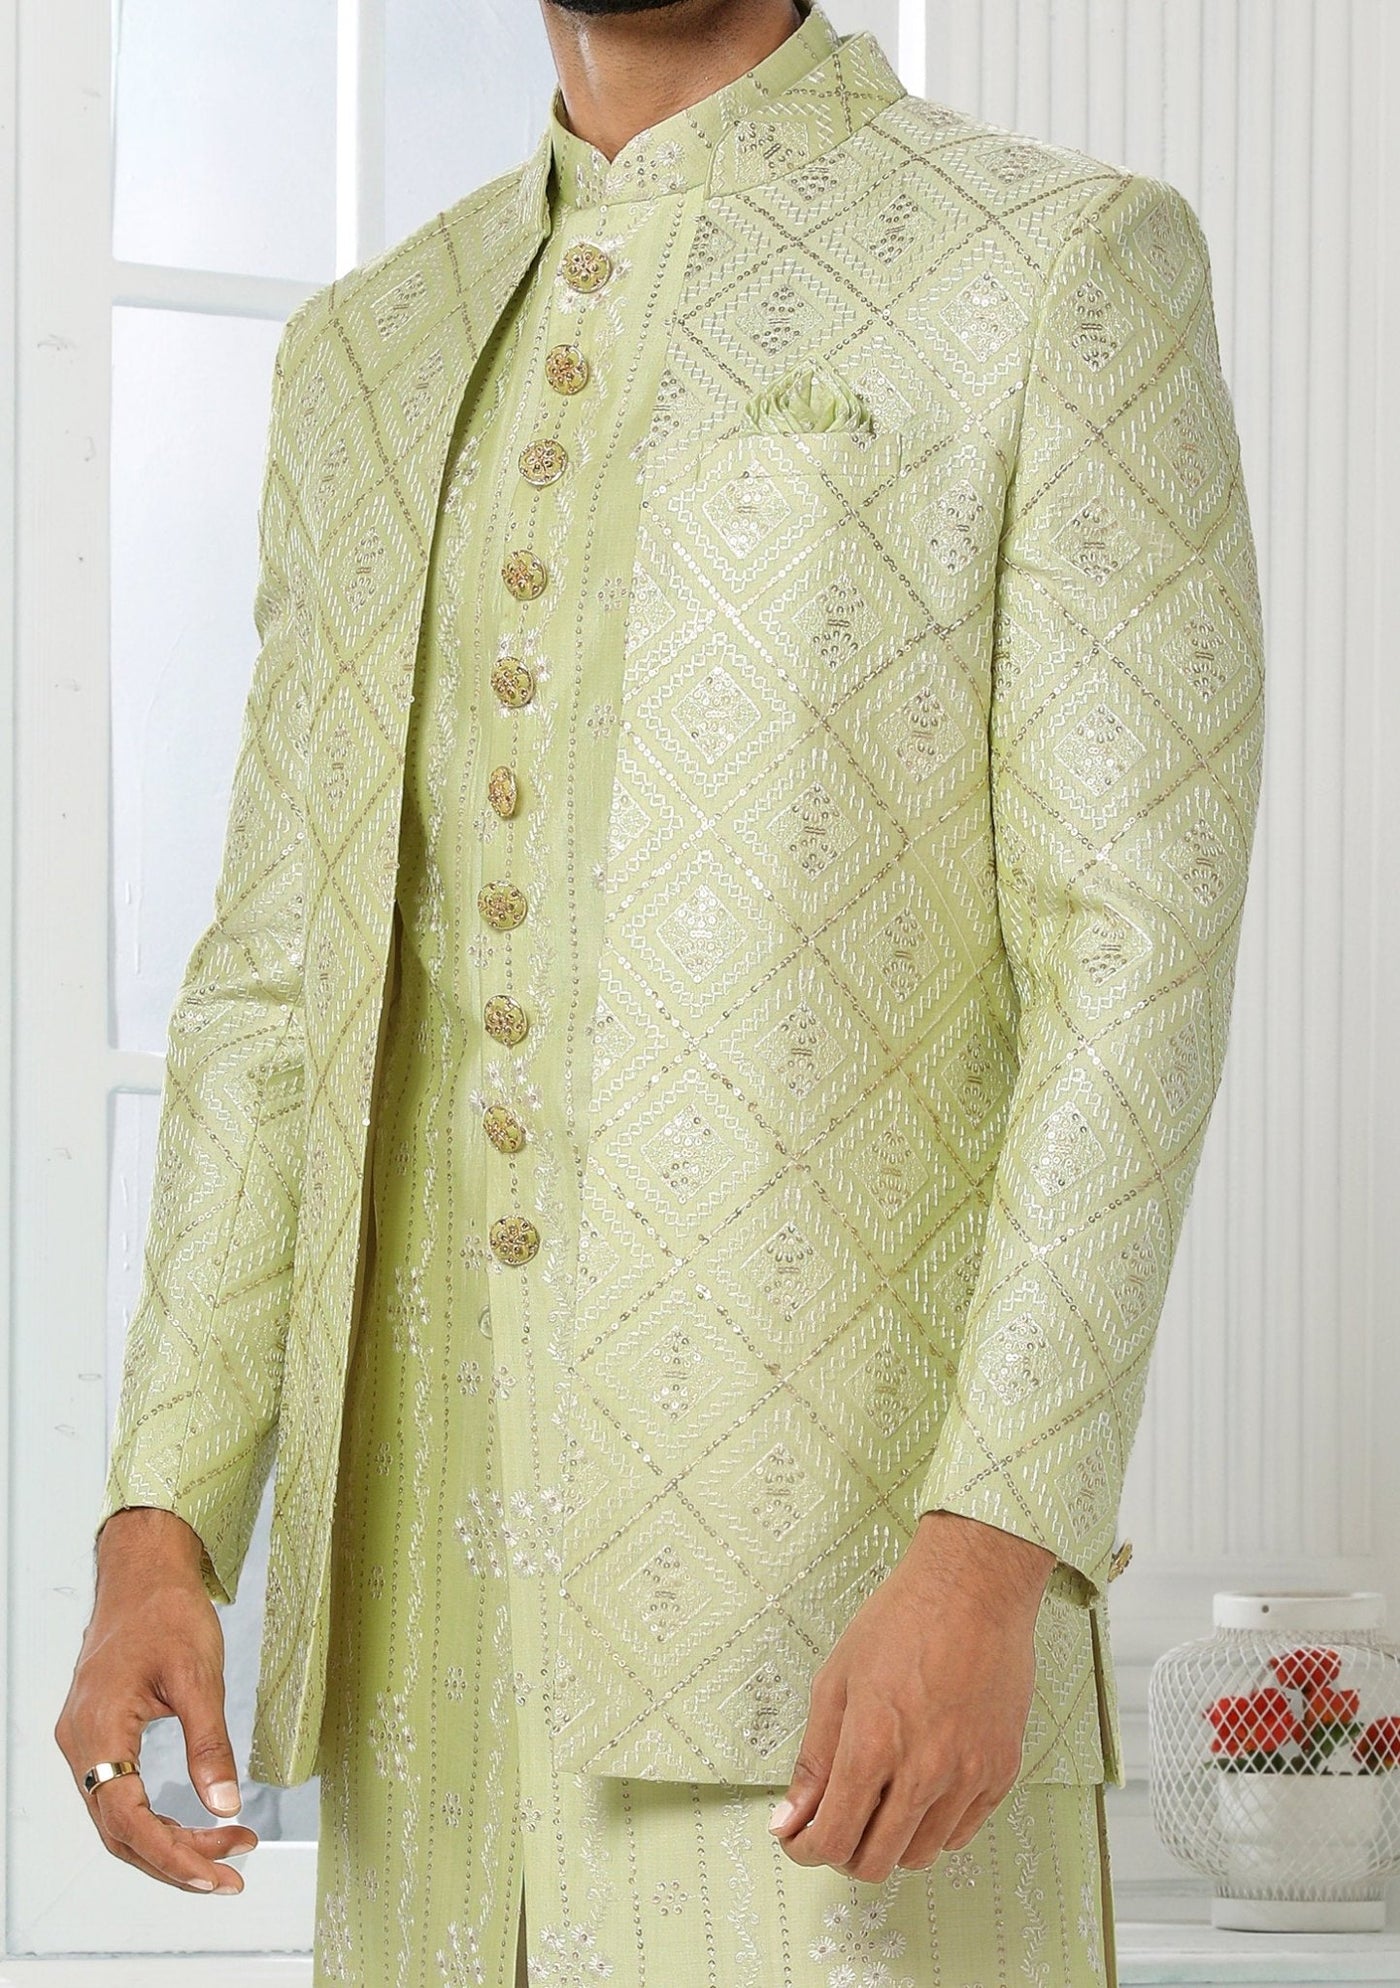 Men's Indo Western Party Wear Sherwani Suit With Jacket - db20432